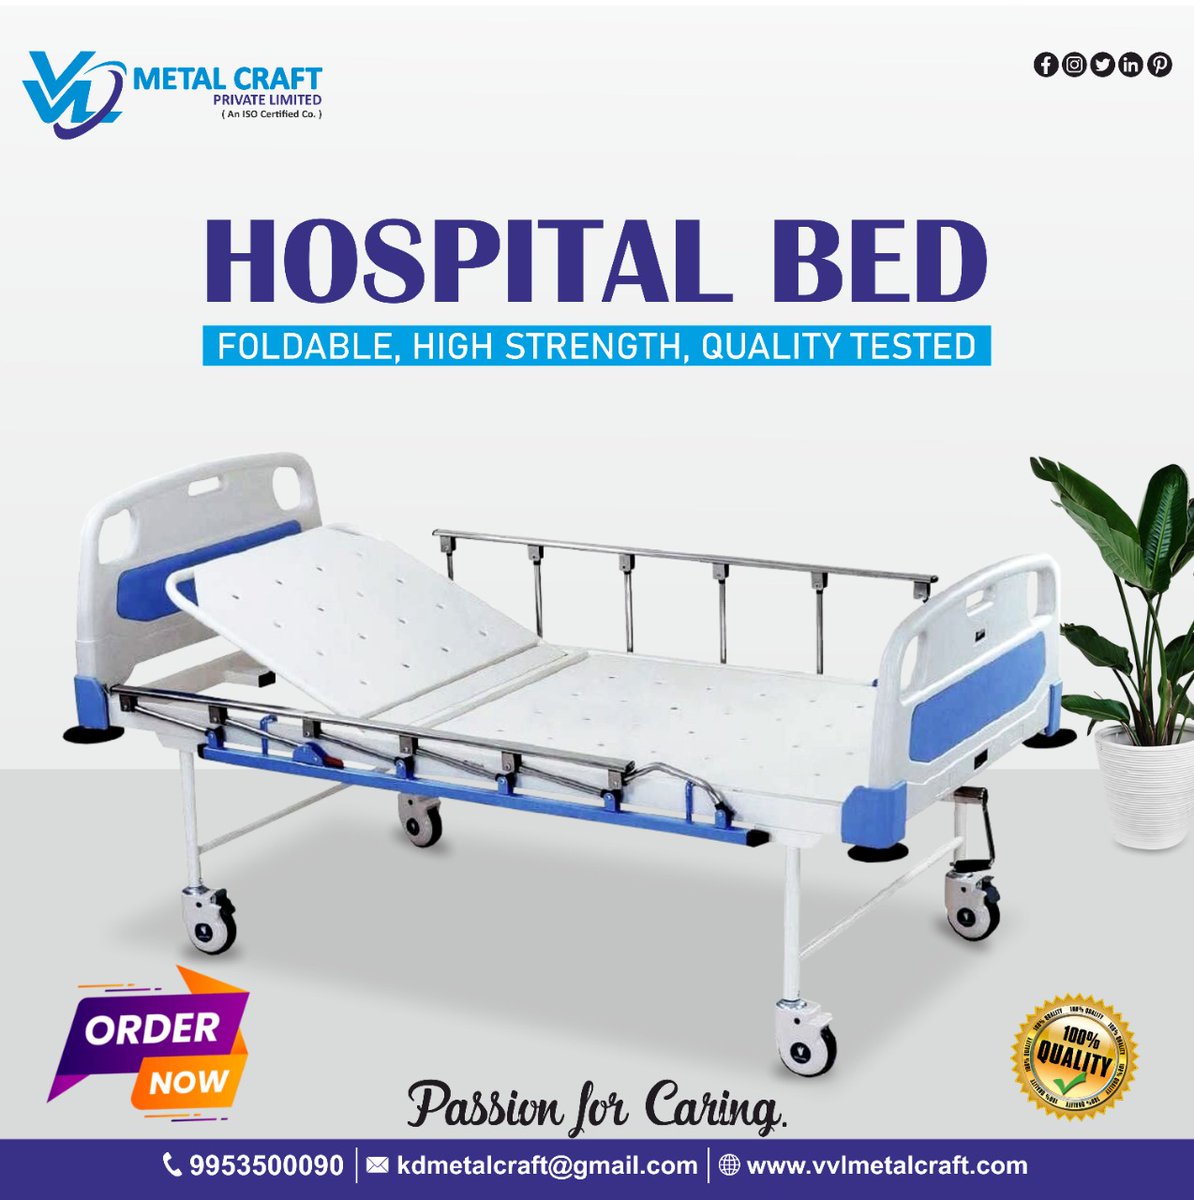 Essential features to note while choosing a new bed:
• Power for transportation ease
• Side rails & access
• Built-in storage and a scale

Contact us for the latest pricing & availability:👇
💌Mail: kdmetalcraft@gmail.com
🌐 vvlmetalcraft.com/product-catego…

#VVLMetalCraft #HospitalBed